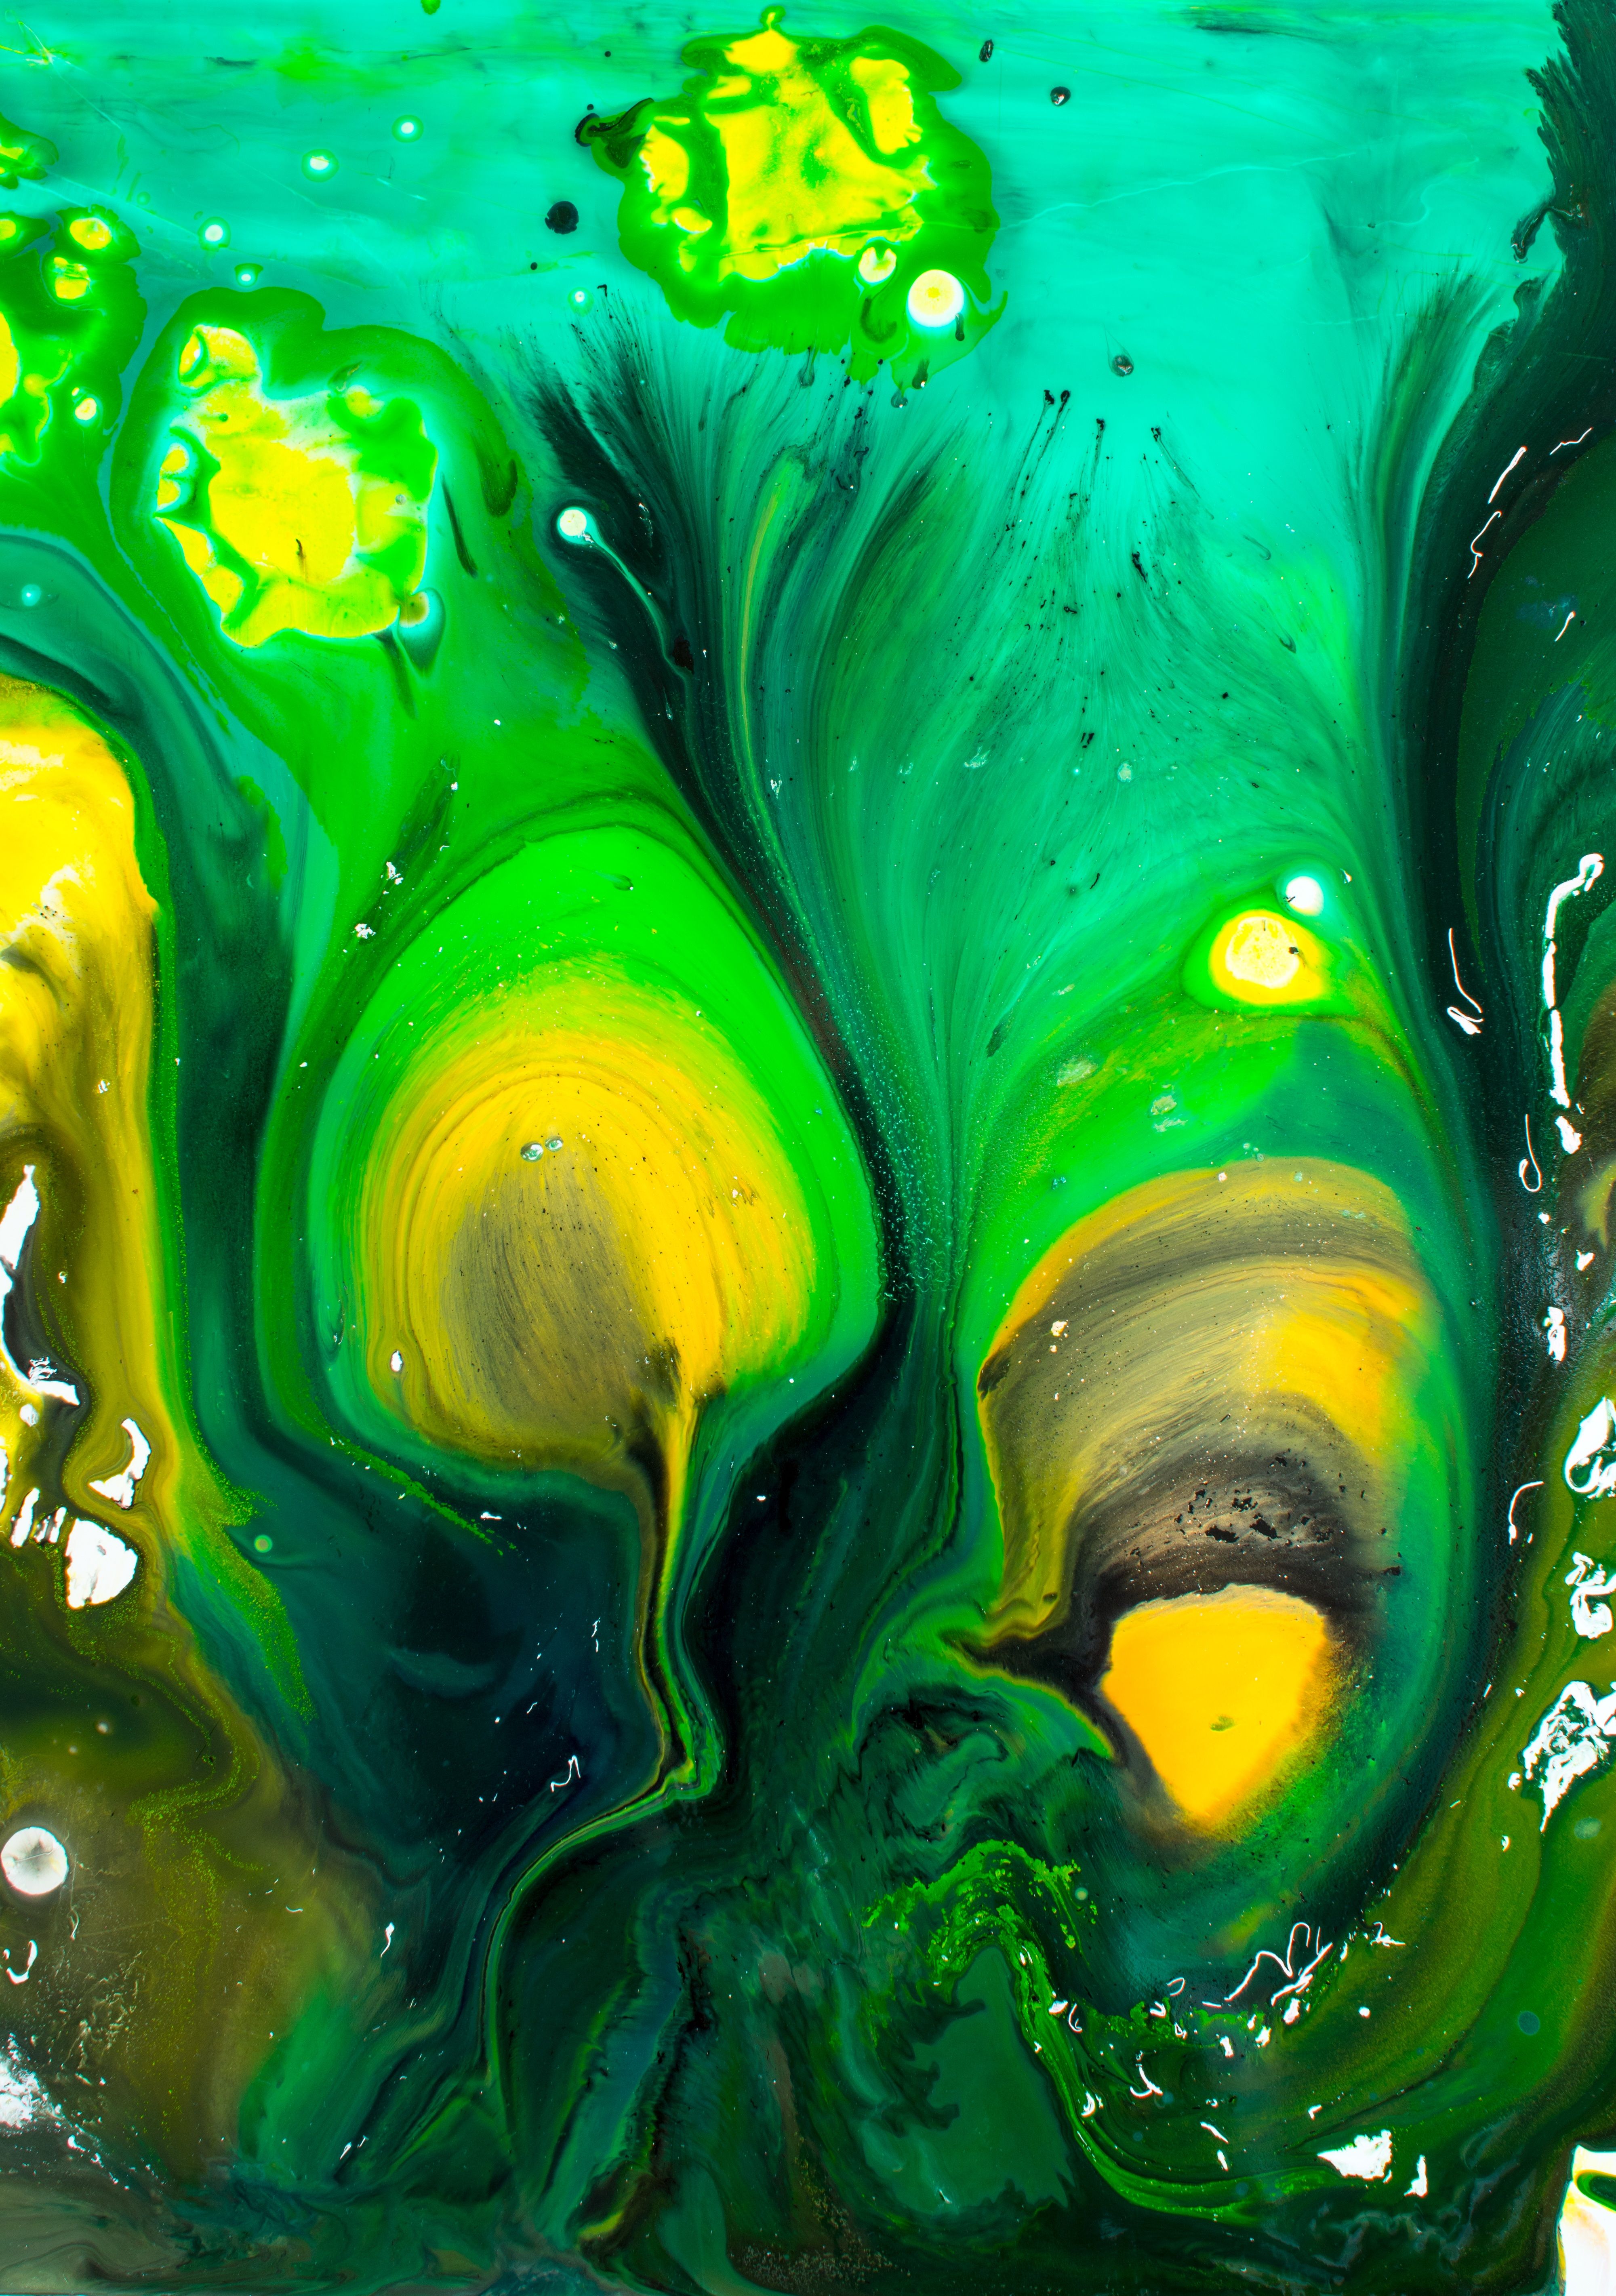 Download wallpapers 4000x5683 paint, drips, green, yellow hd backgrounds